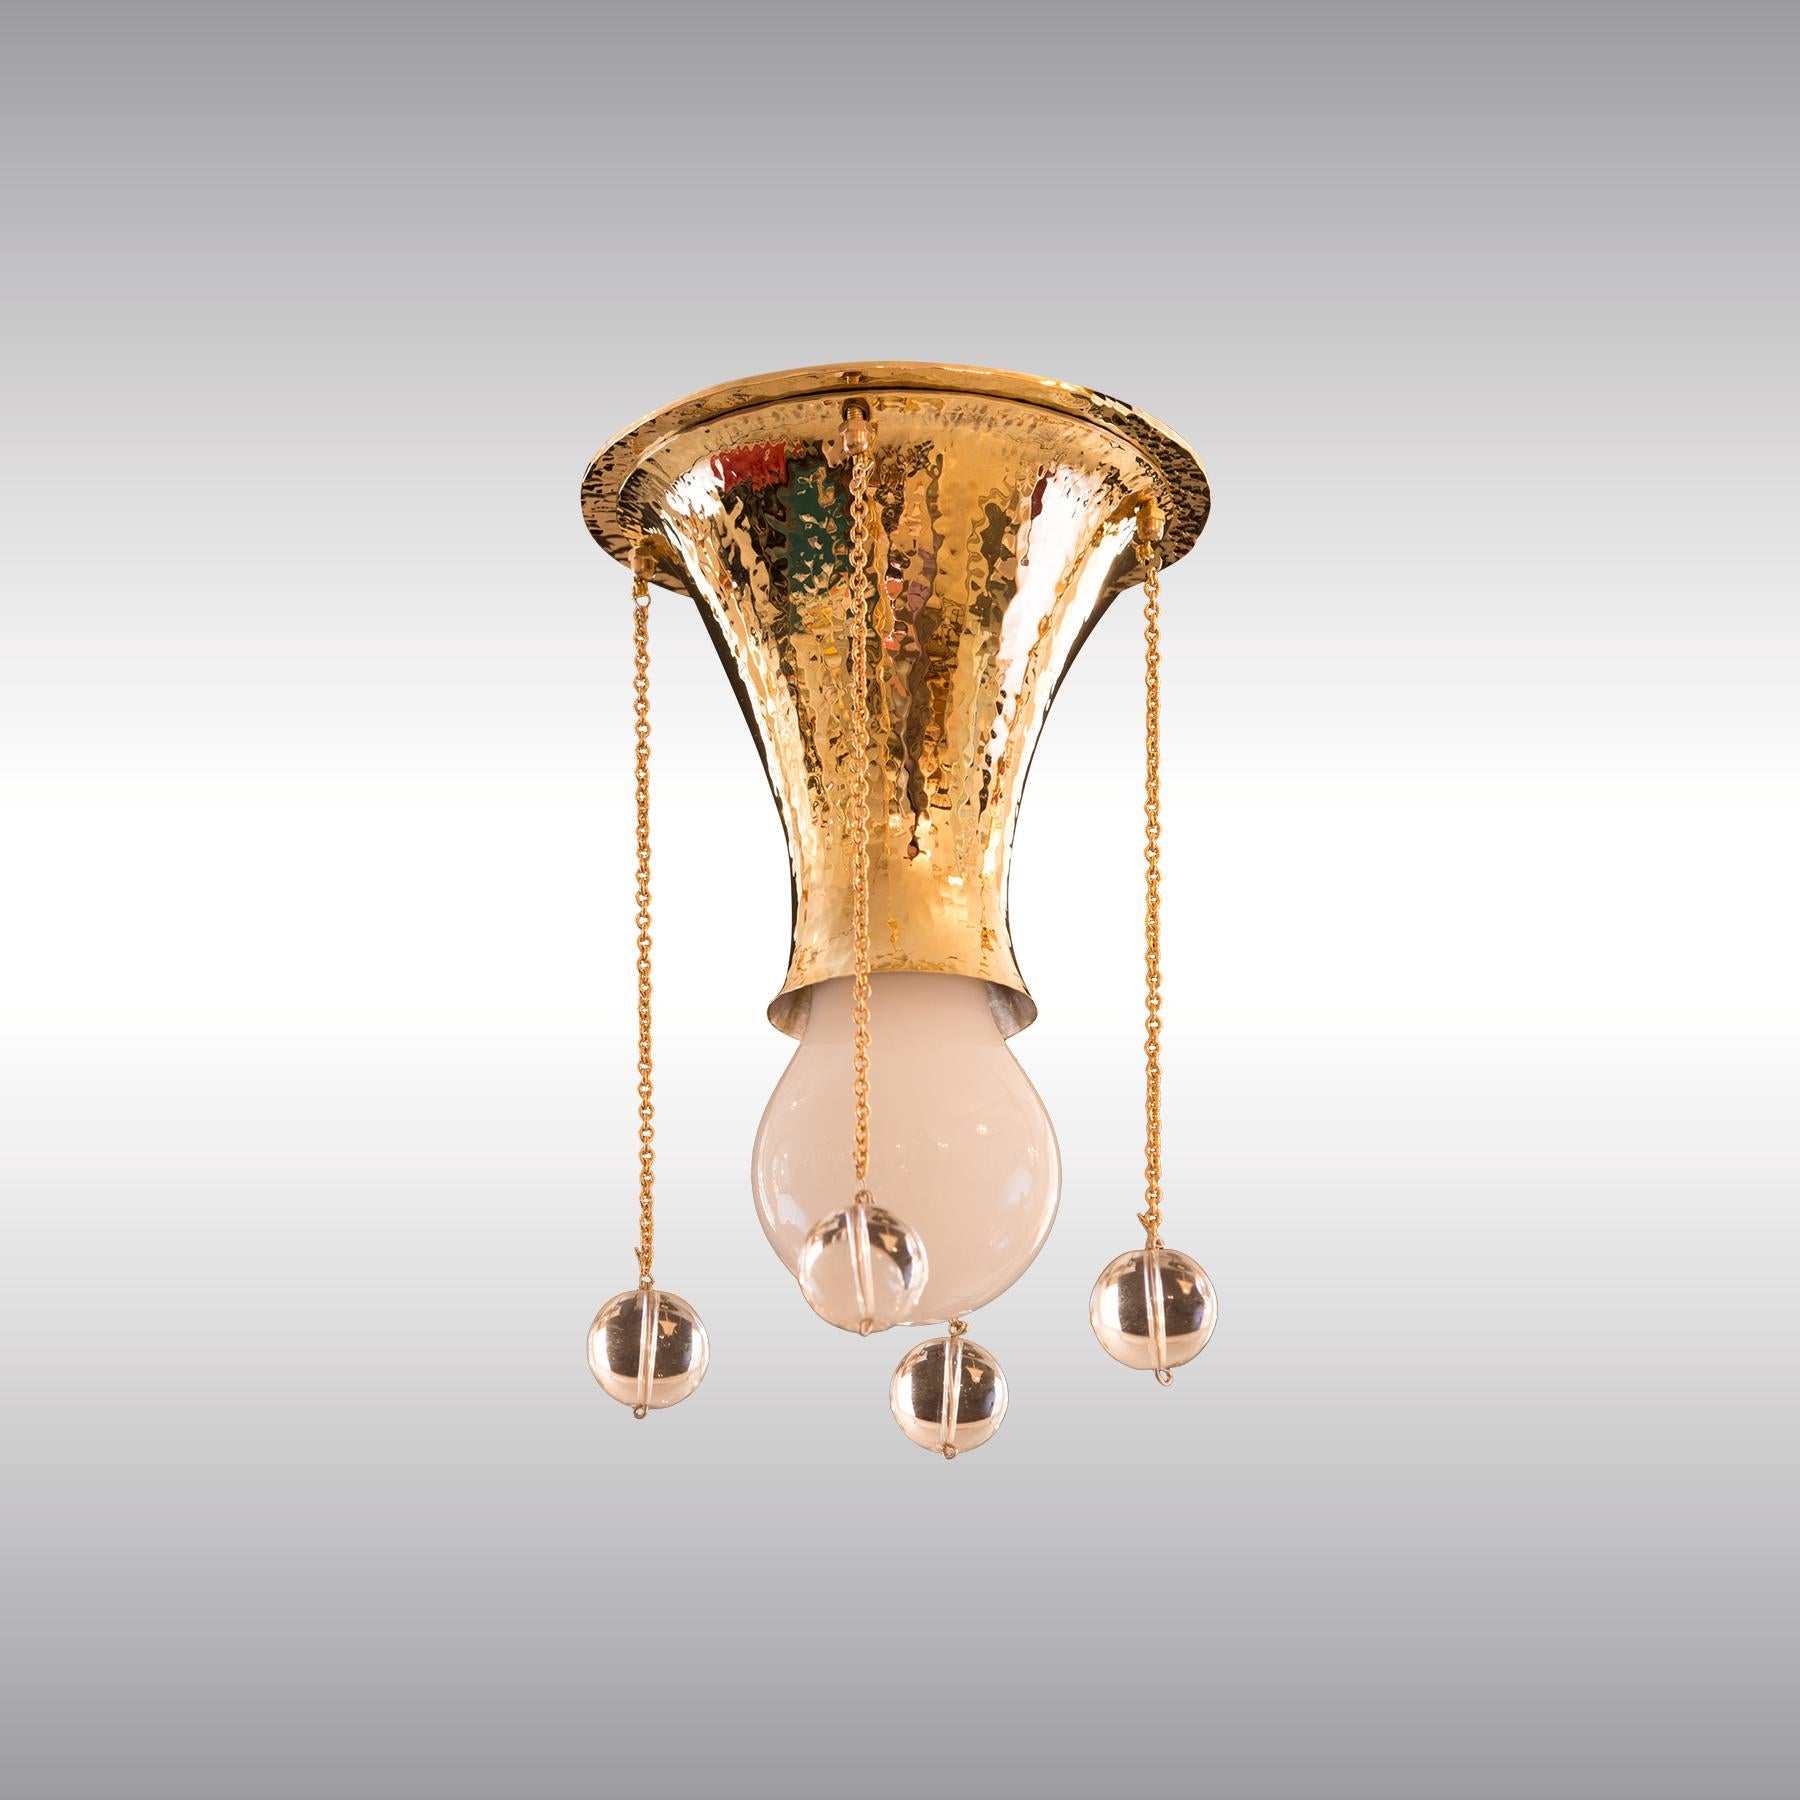 Hanging- lamp from the showrooms of the Wiener Werkstaette used by Hoffmann in several variations. Hammered originally. Works-number M115, pattern-book of the Wiener Werkstaette: WWMB 3 p. 256-257

All components according to the UL regulations,